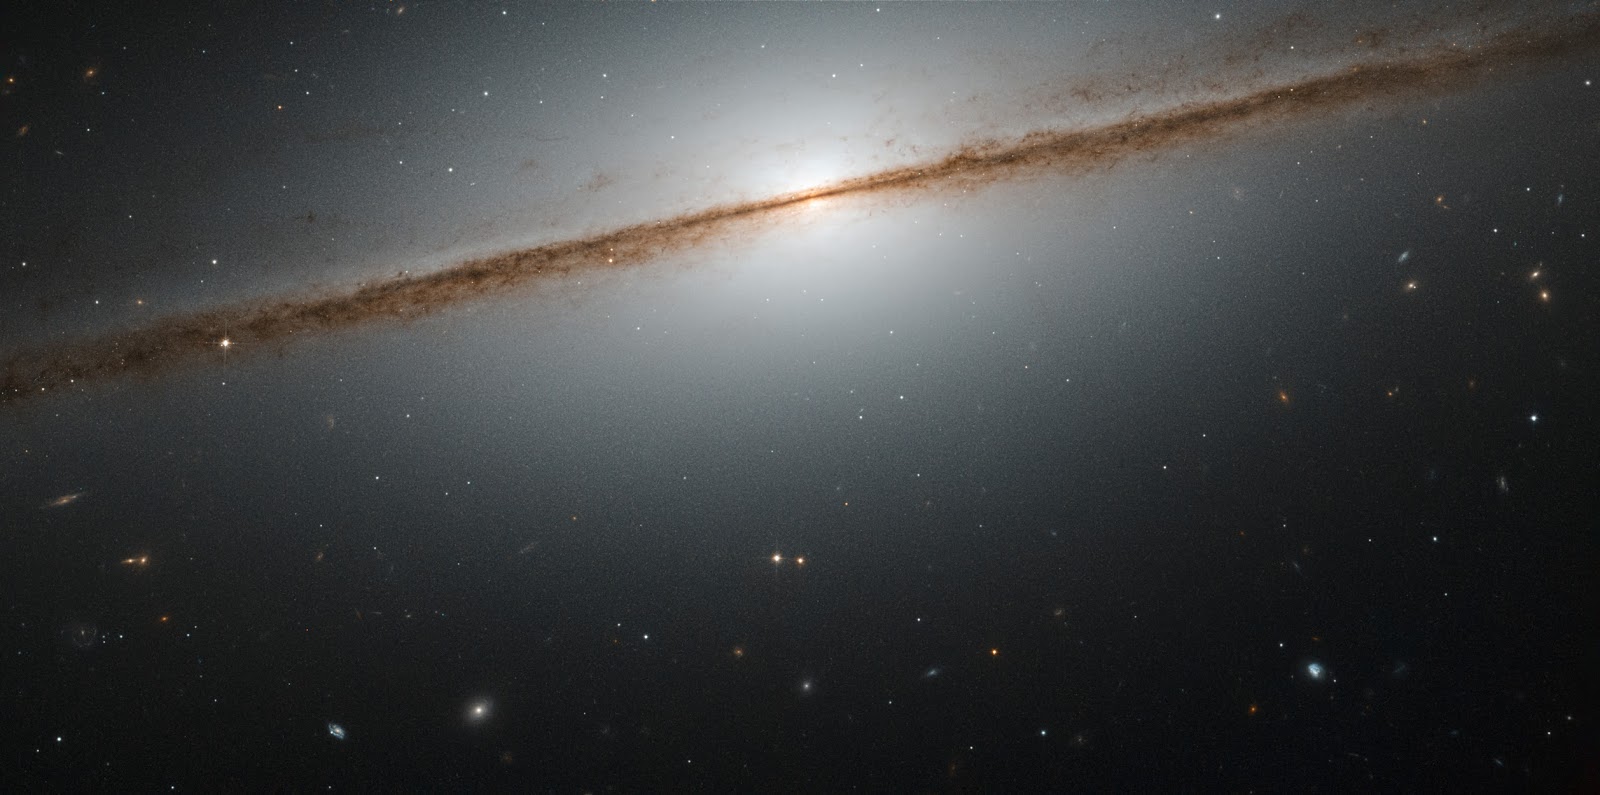 Hubble's Little Sombrero Hubble's Little Sombrero   Galaxies can take many shapes and be oriented any way relative to us in the sky. This can make it hard to figure out their actual morphology, as a galaxy can look very different from different viewpoints. A special case is when we are lucky enough to observe a spiral galaxy directly from its edge, providing us with a spectacular view like the one seen in this picture of the week.  This is NGC 7814, also known as the “Little Sombrero.” Its larger namesake, the Sombrero Galaxy, is another stunning example of an edge-on galaxy — in fact, the “Little Sombrero” is about the same size as its bright namesake at about 60,000 light-years across, but as it lies farther away, and so appears smaller in the sky.  NGC 7814 has a bright central bulge and a bright halo of glowing gas extending outwards into space. The dusty spiral arms appear as dark streaks. They consist of dusty material that absorbs and blocks light from the galactic center behind it. The field of view of this NASA/ESA Hubble Space Telescope image would be very impressive even without NGC 7814 in front; nearly all the objects seen in this image are galaxies as well.   Image Credit: ESA/Hubble, NASA & Josh Barrington Explanation from: http://www.nasa.gov/content/goddard/hubbles-little-sombrero/